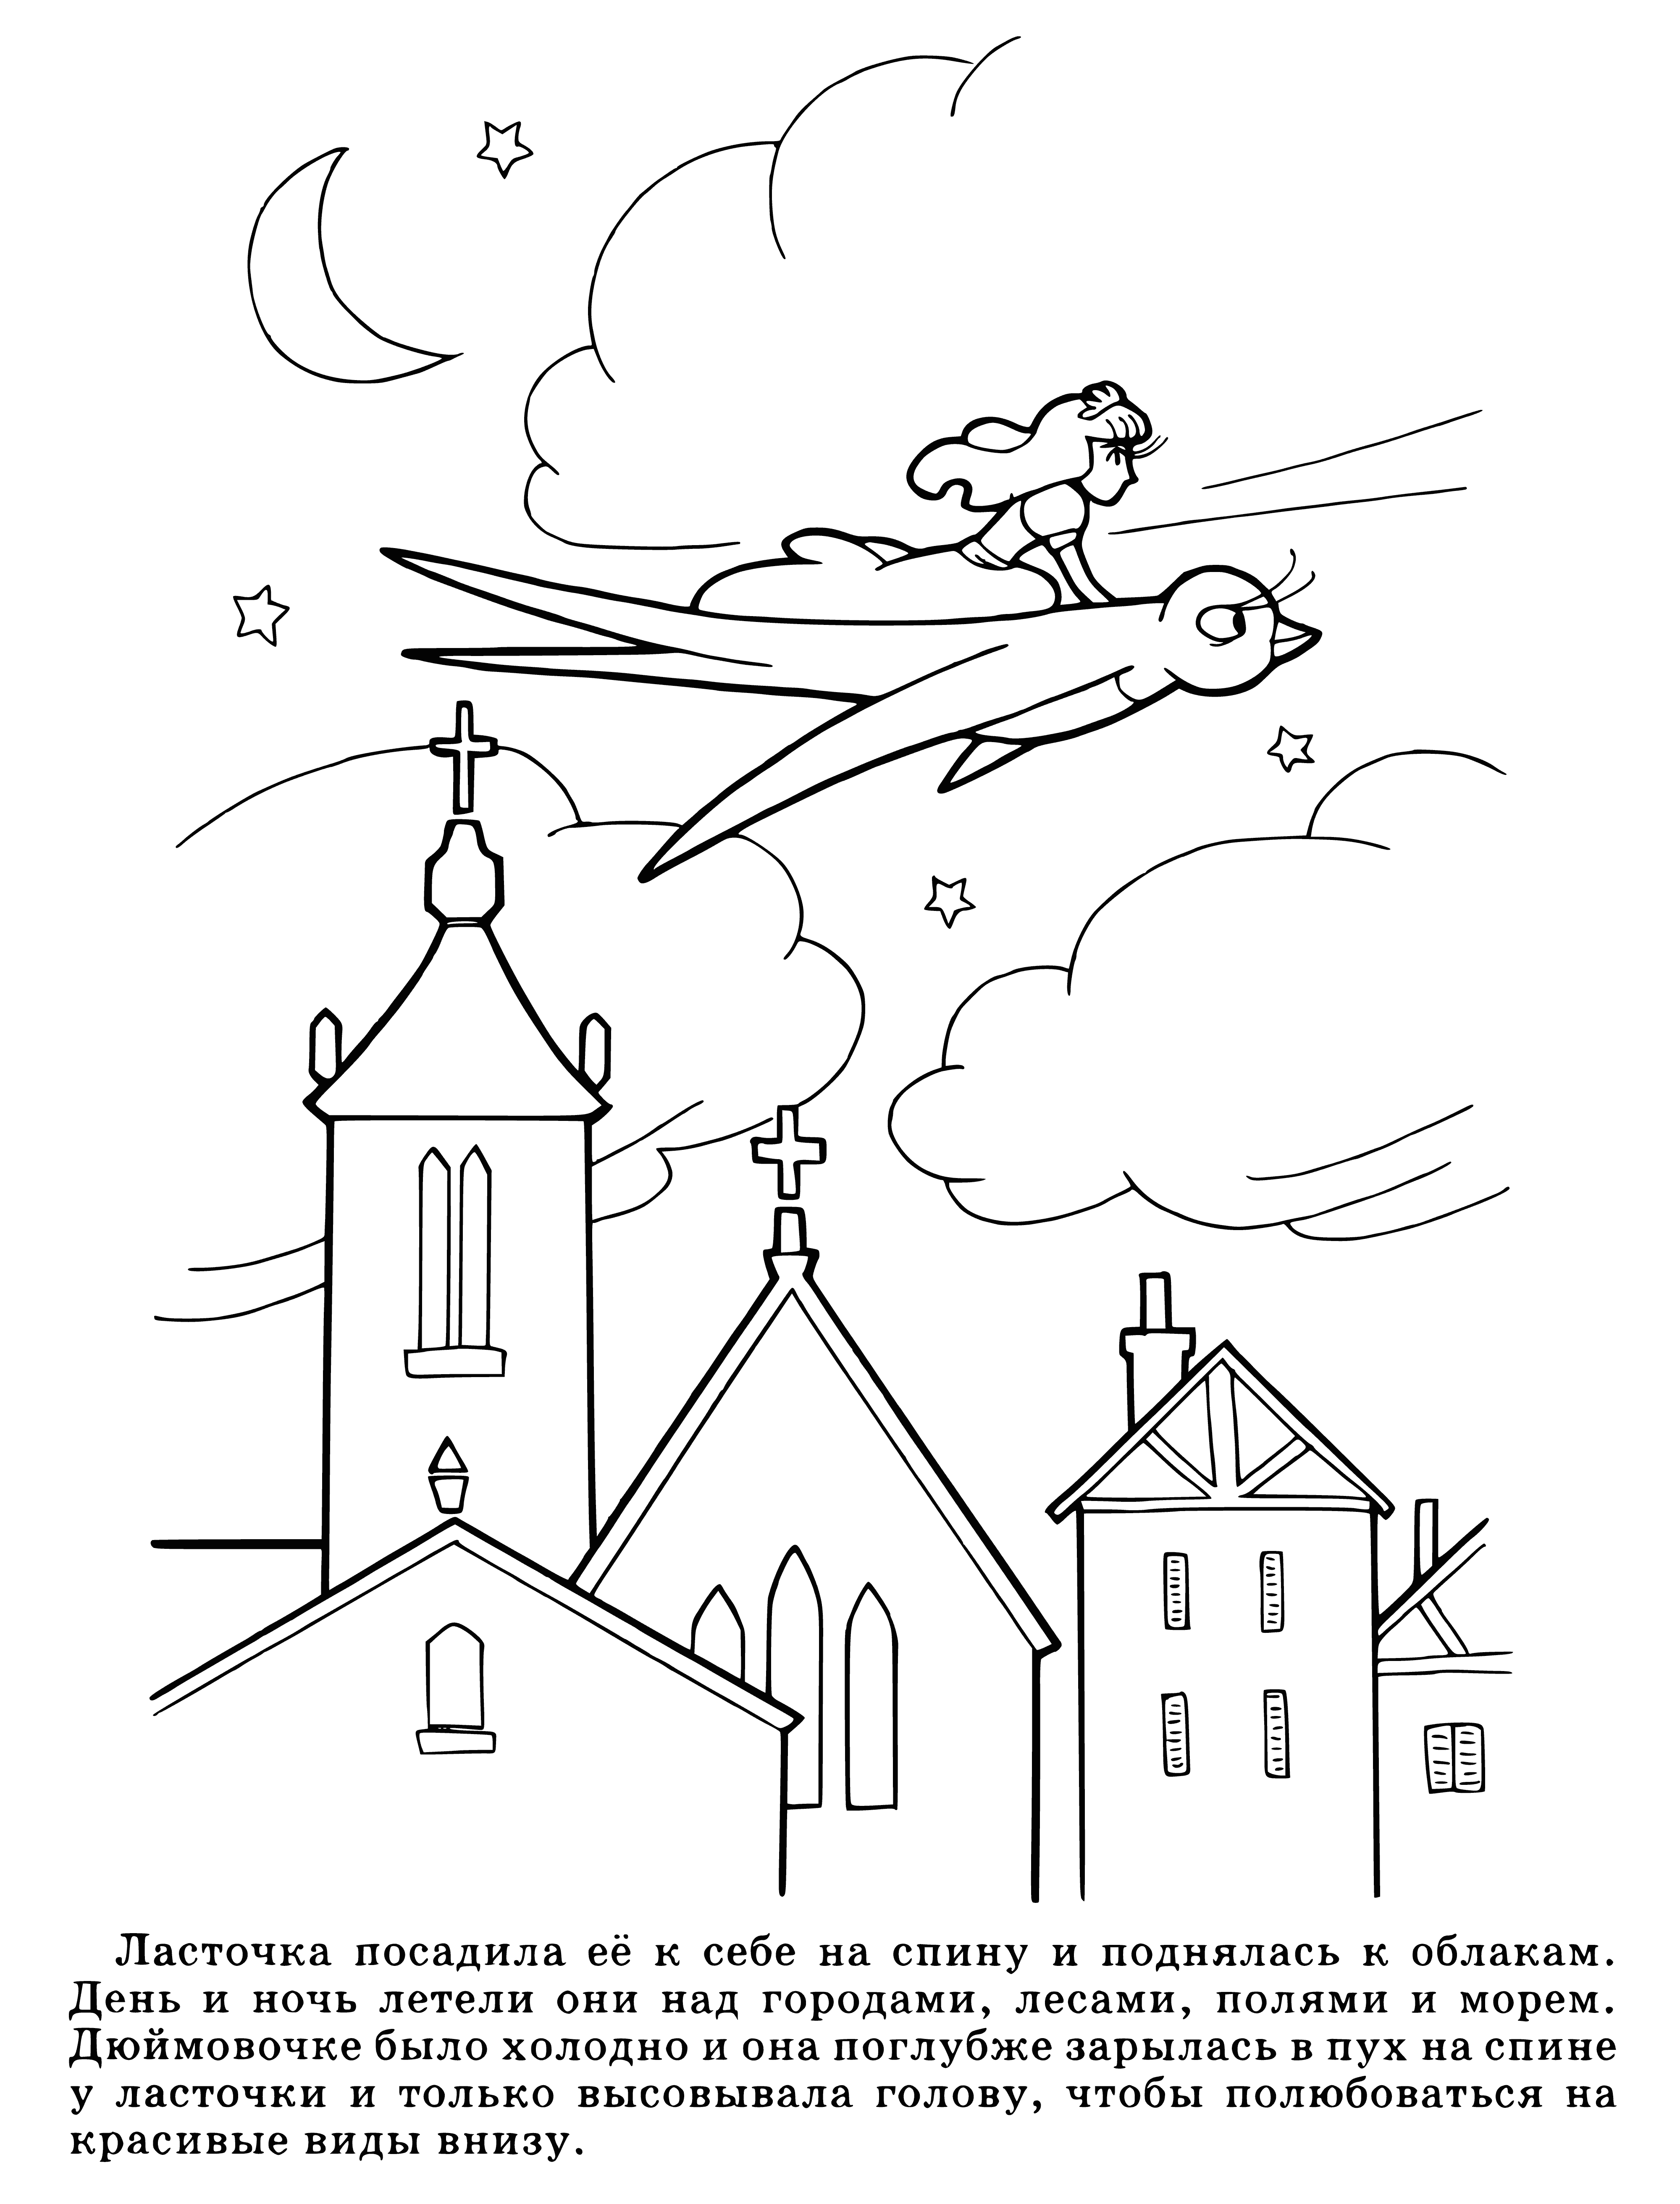 coloring page: Swallow flying to hole in tree for its home.